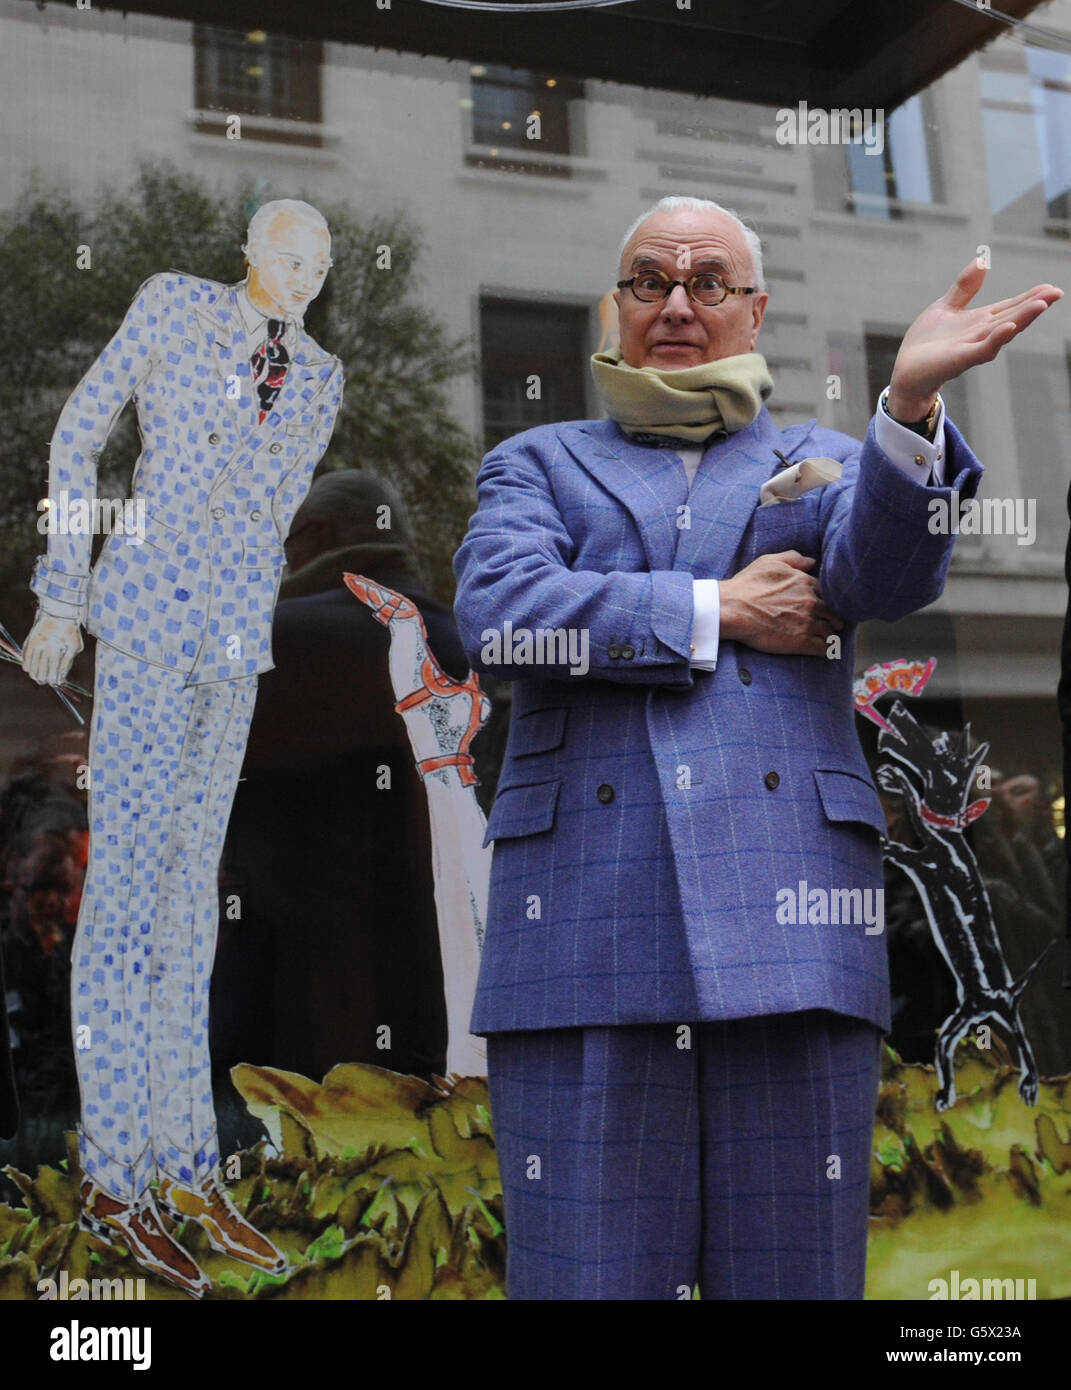 Spanish footwear designer Manolo Blahnik, unveils the windows display designed by him for London Fashion Week at The Mayfair Hotel, London, the official hotel to London Fashion Week. Stock Photo